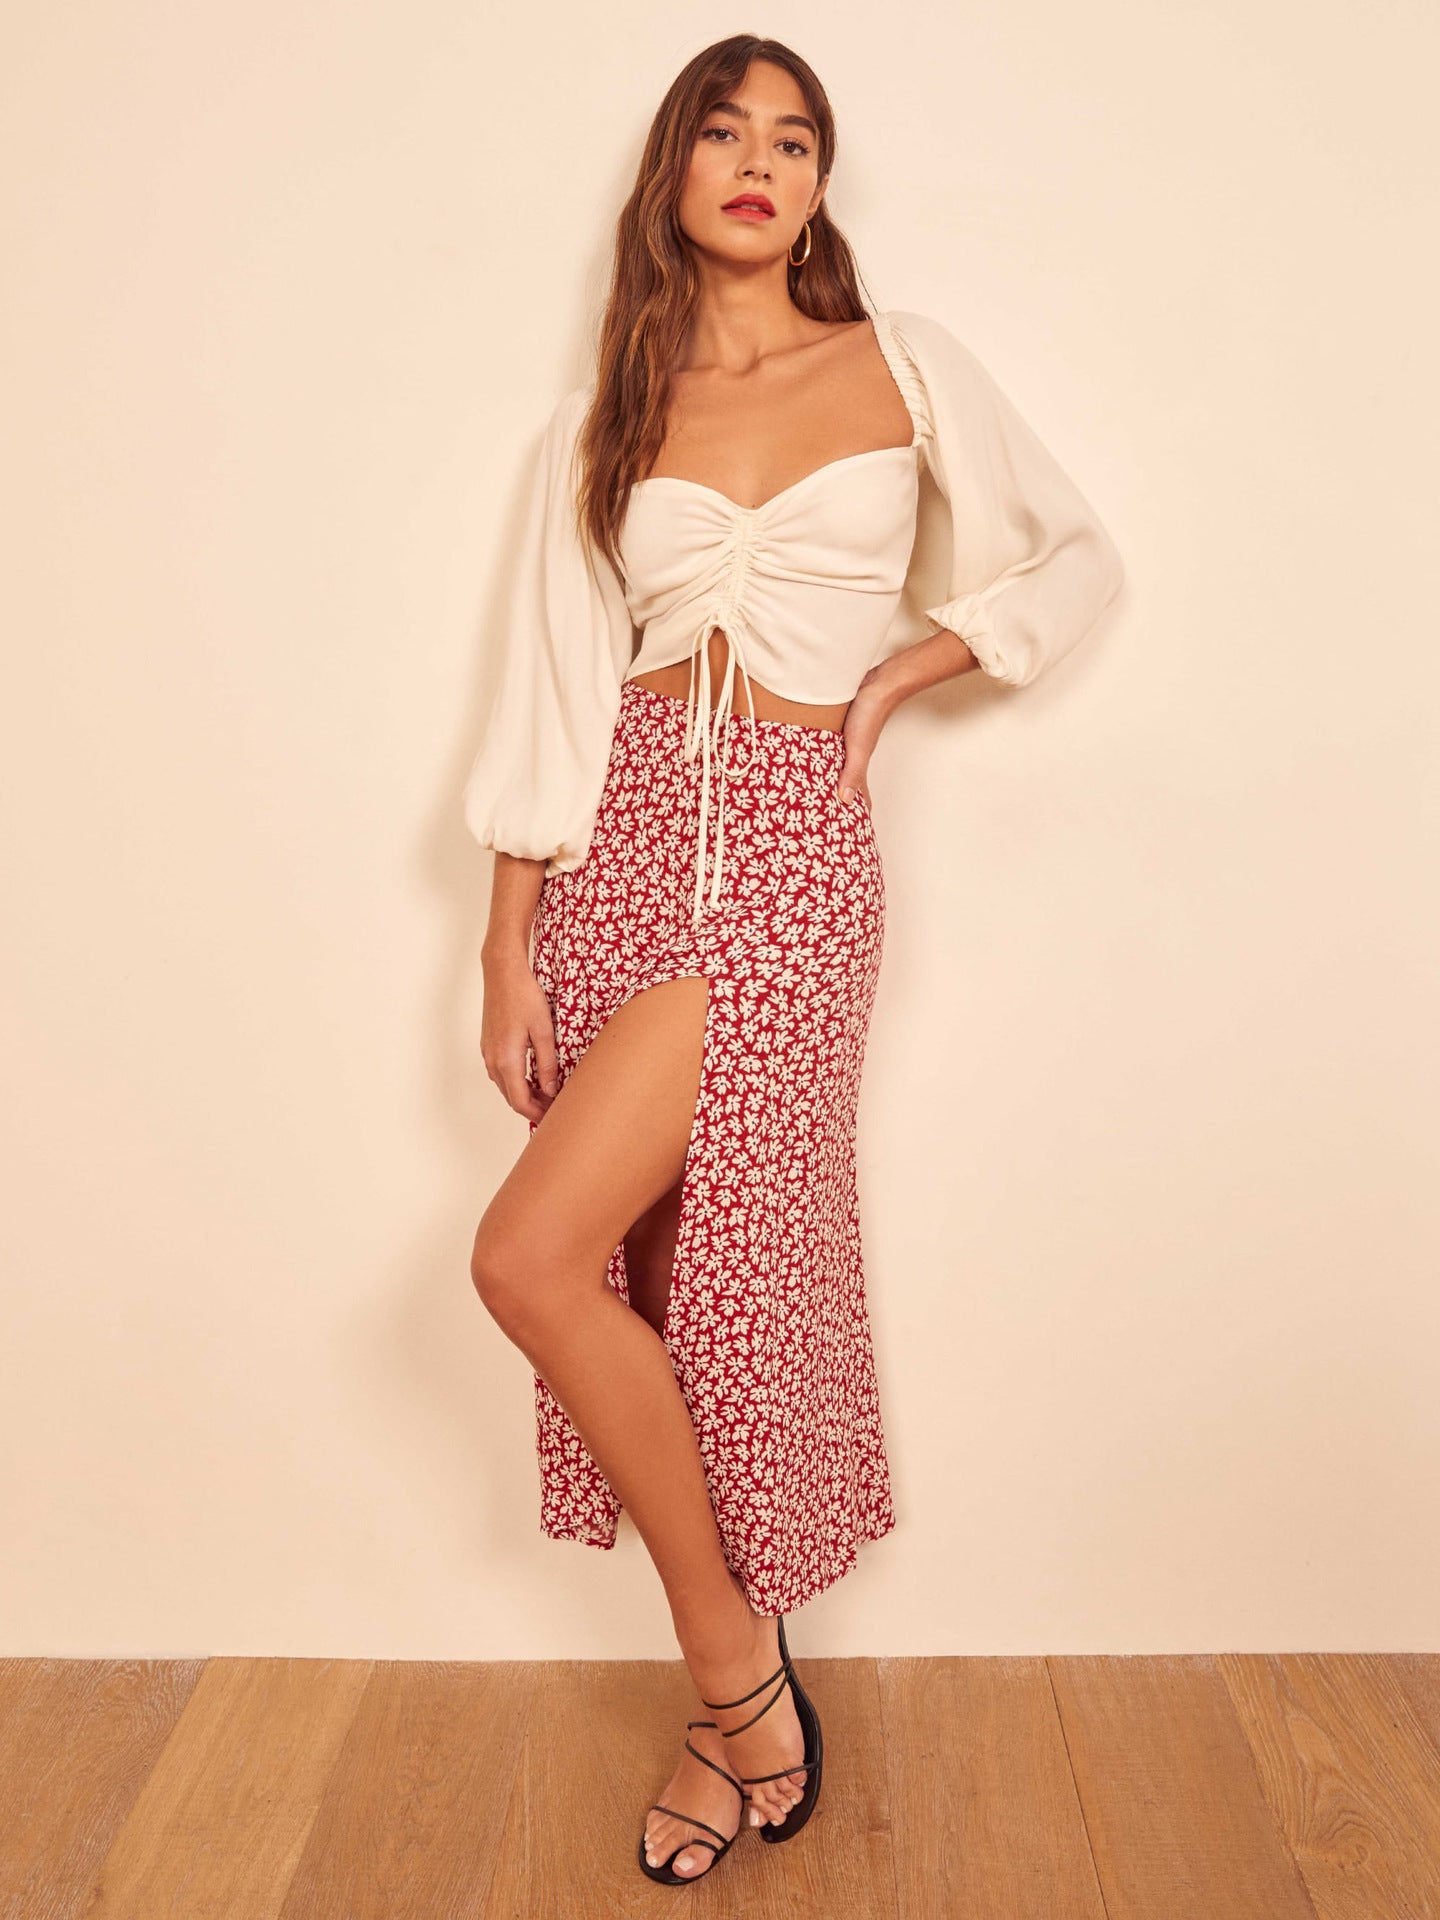 Tossy High Waist Split Out Floral Mid Skirt Women Sexy Vintage Boho A-line Skirts Slim Party Streetwear 2022 Holiday Beachwear